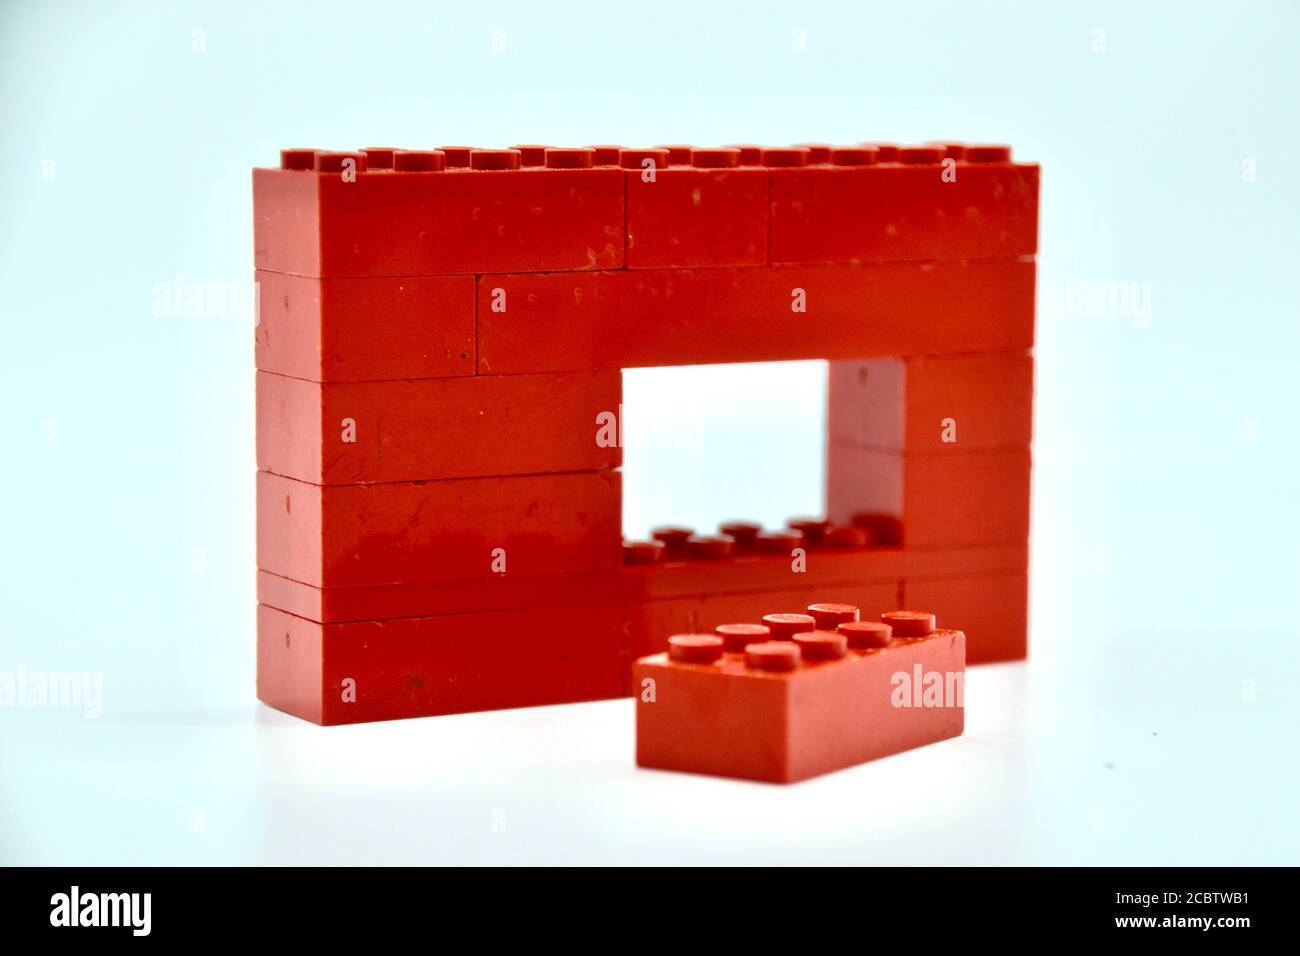 Concept studio image of a red Lego brick wall on white background with a gap in it and a single brick out front symbolizing individualism Stock Photo